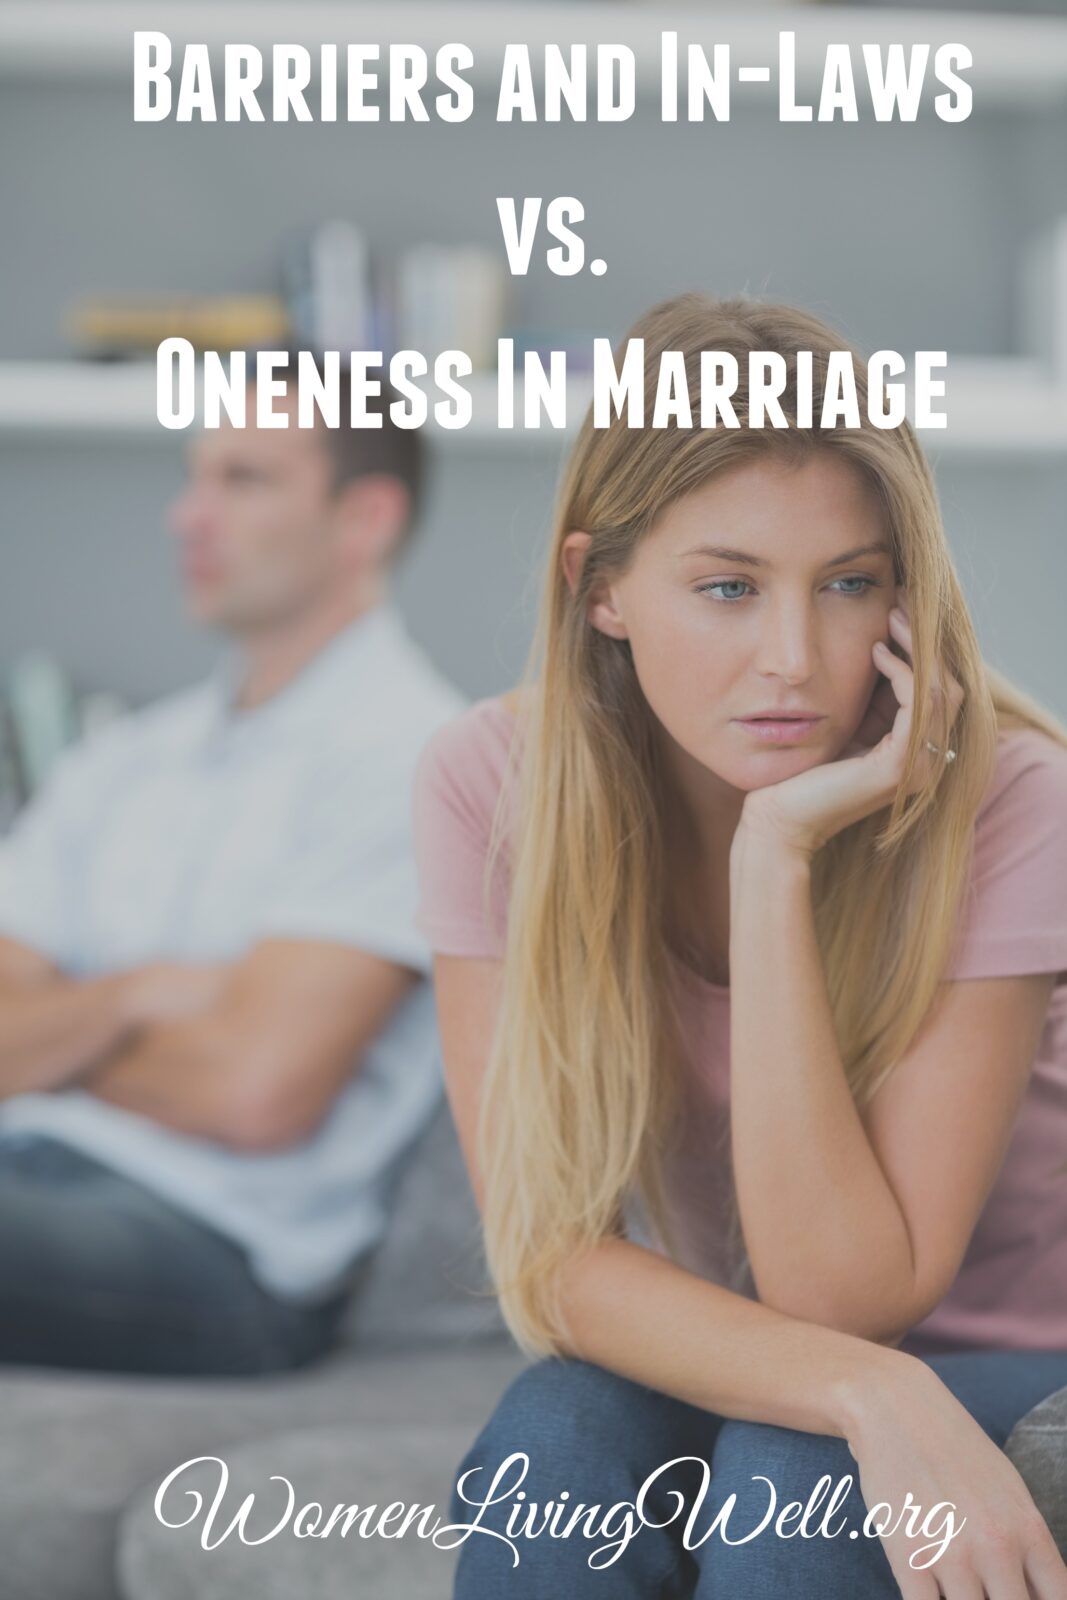 How can barriers and in-law prevent or hold back oneness in marriage? Mark chapter 10 reveals this for us and gives us answers. #marriage #marriagegoals #womenlivingwell